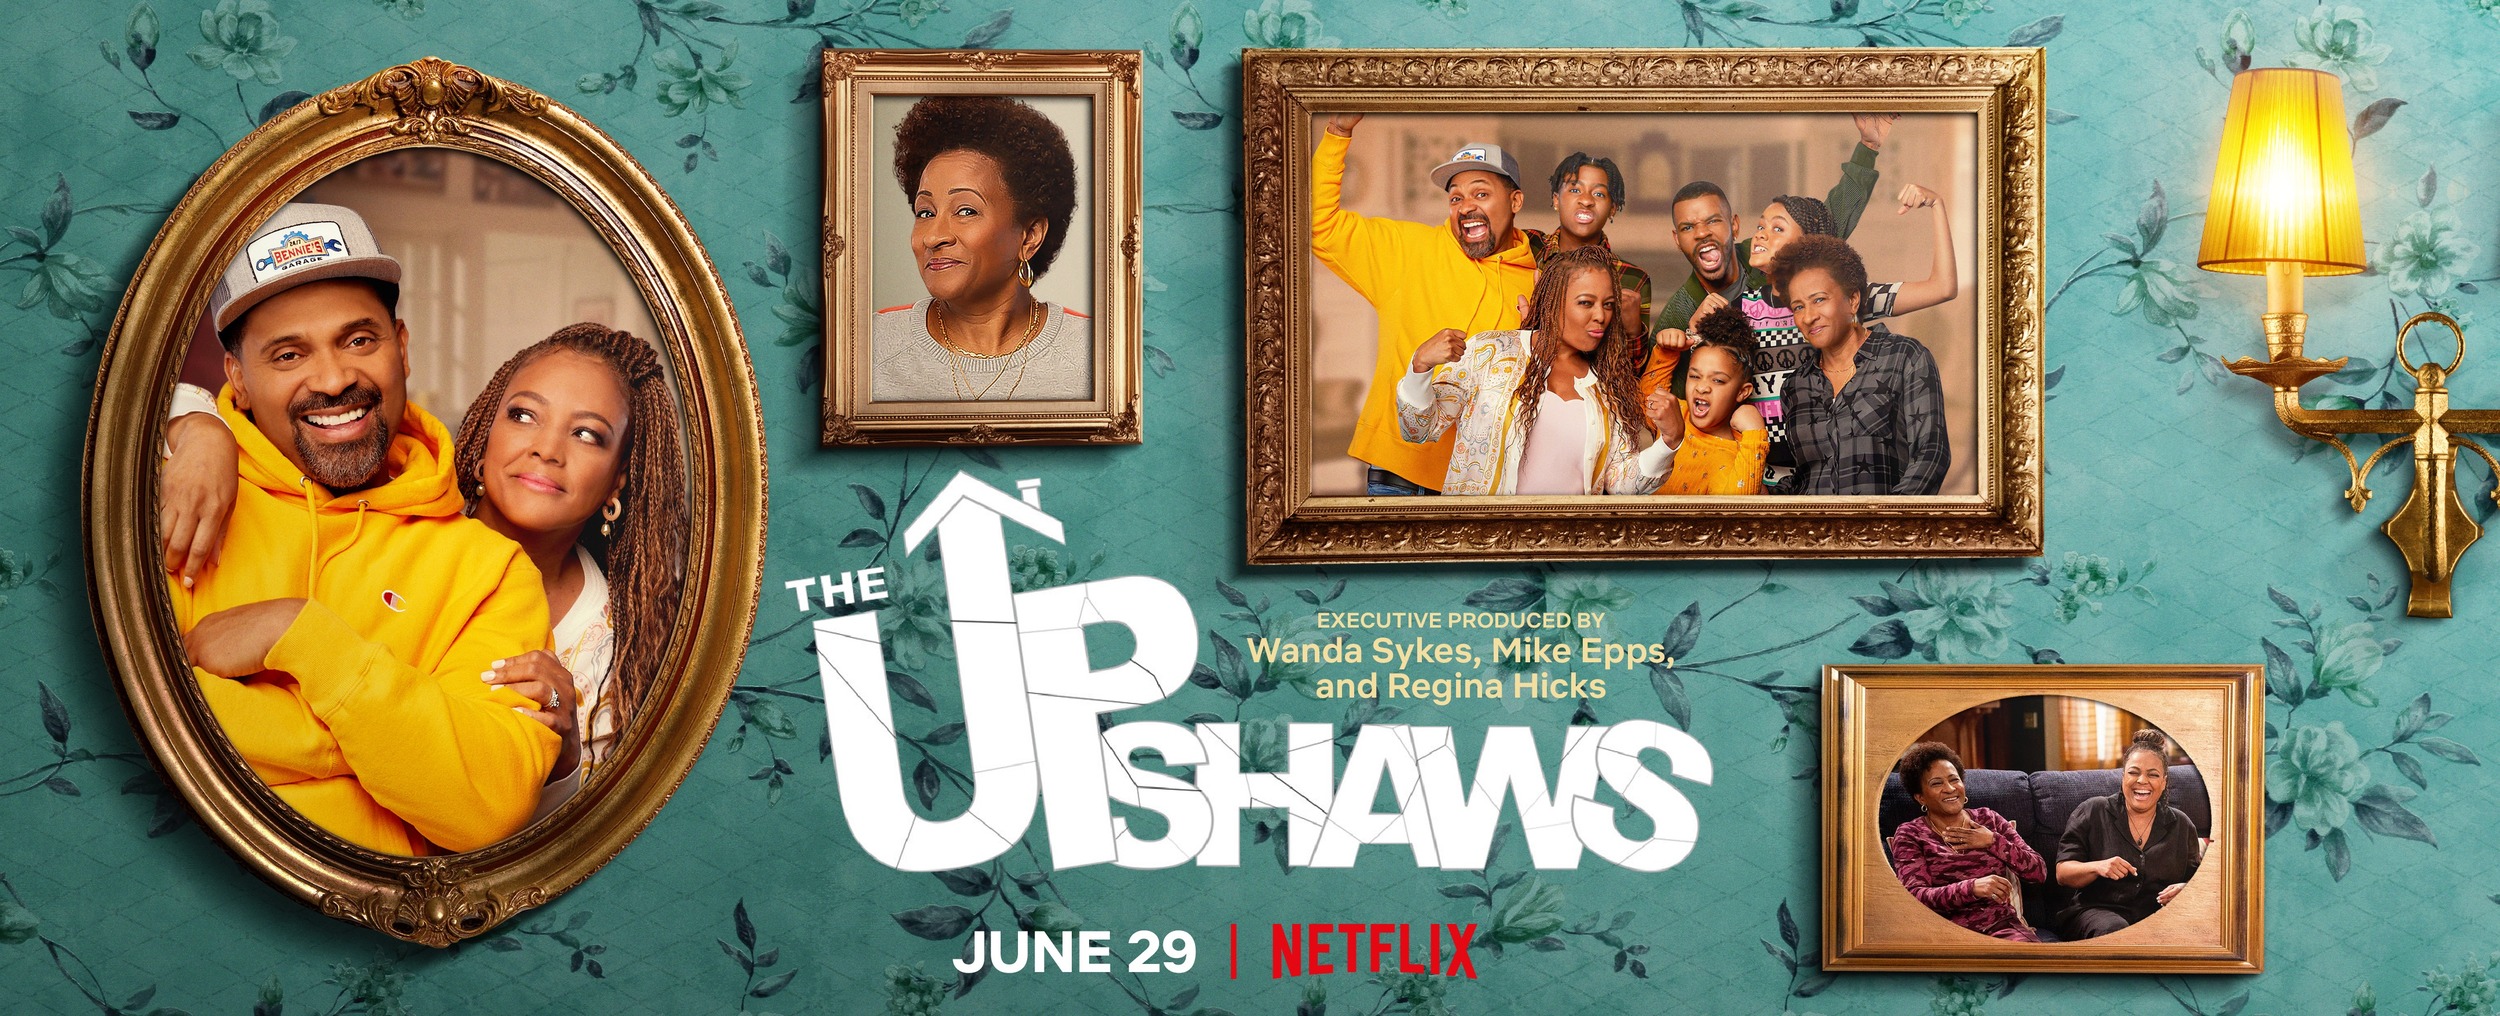 Mega Sized TV Poster Image for The Upshaws (#5 of 6)